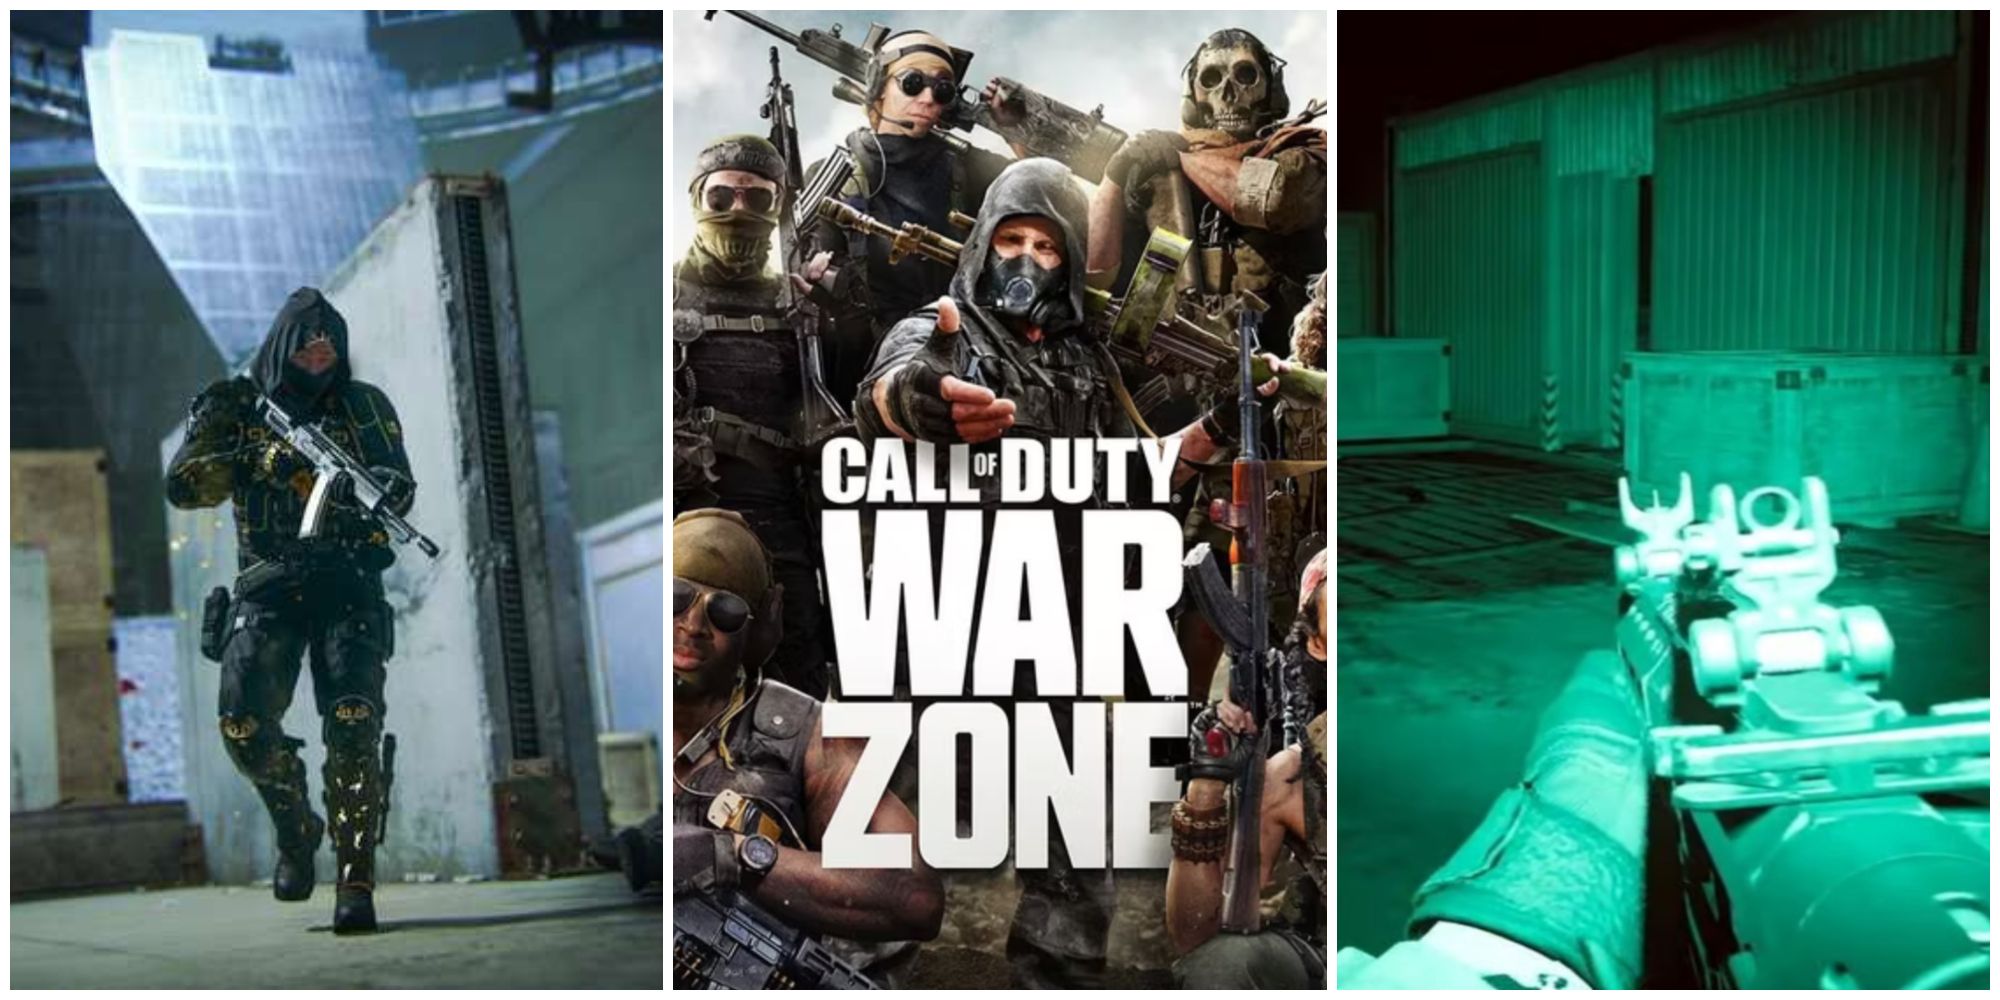 Warzone - Soldier in Gulag, Cover Art, & Soldier Using NVG